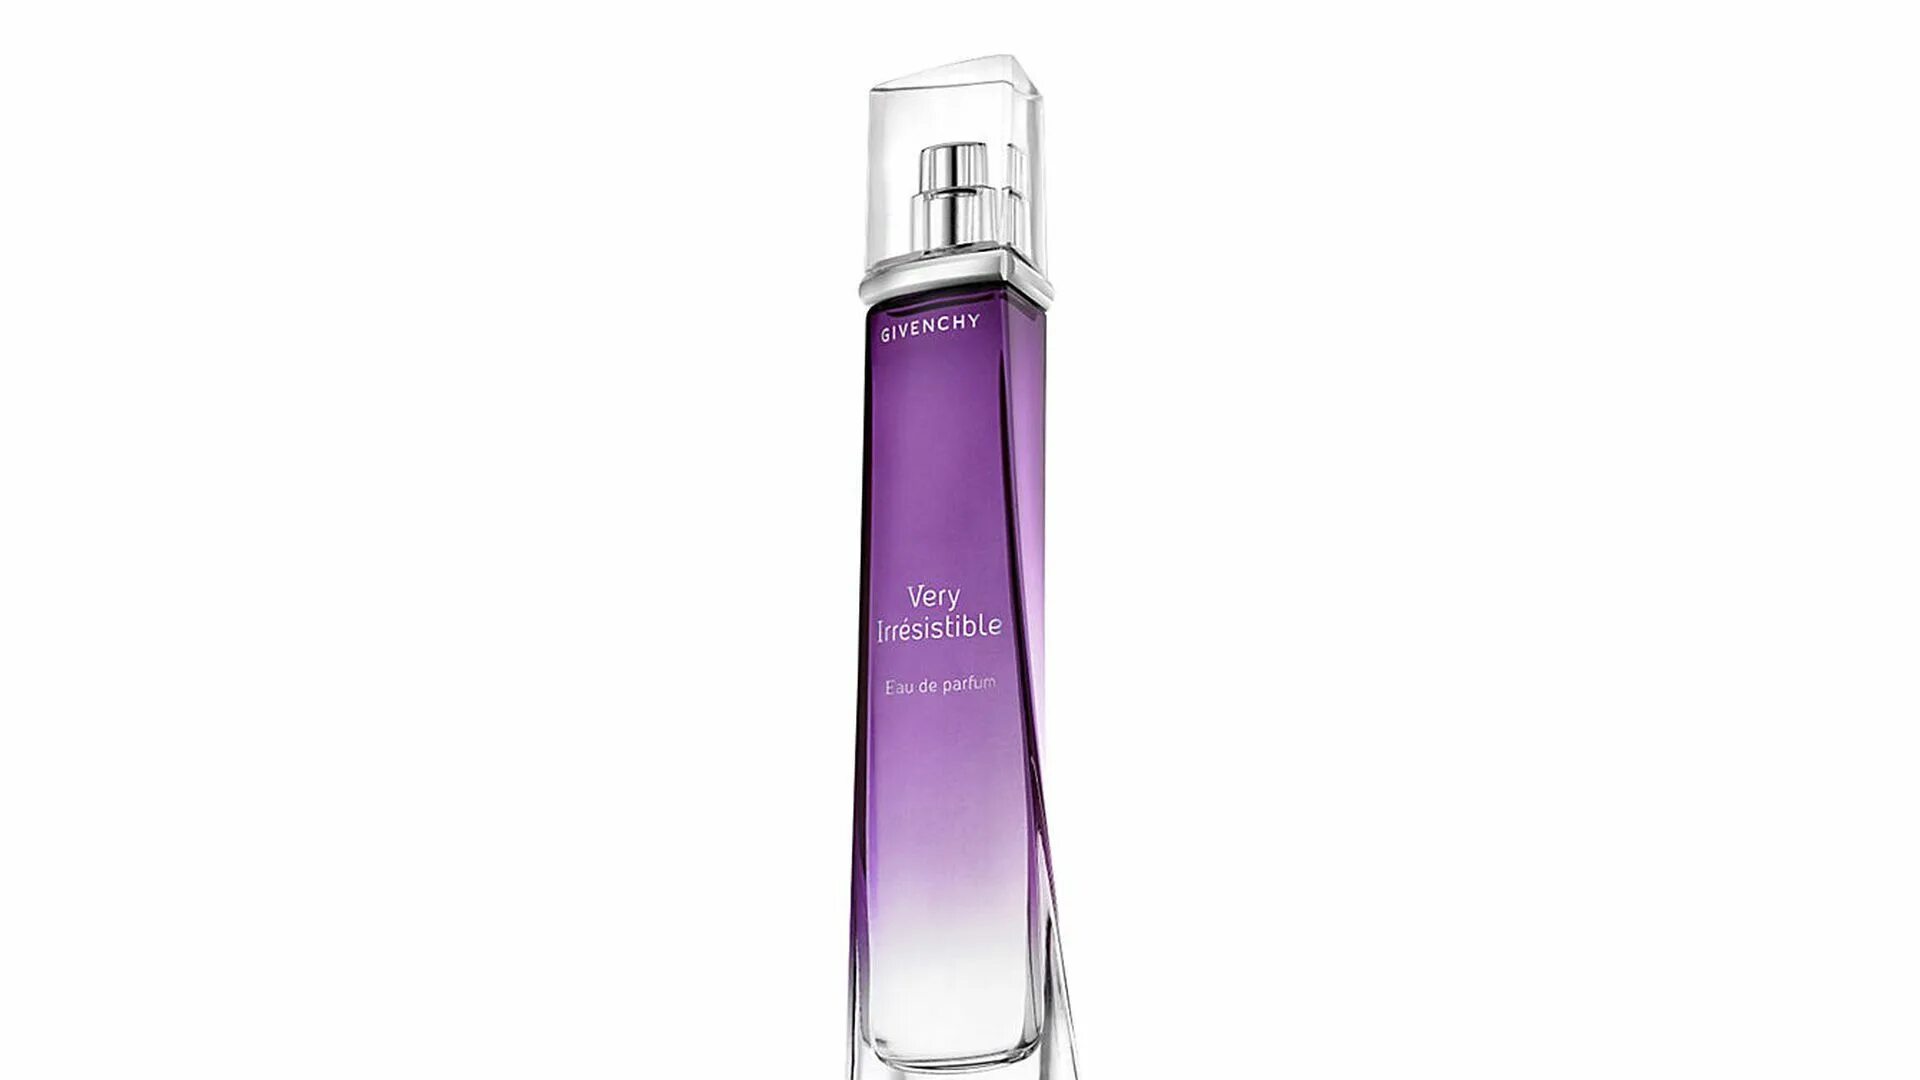 Givenchy irresistible de toilette. Givenchy very irresistible. Туалетная вода Givenchy very irresistible. Givenchy irresistible Eau de Parfum, 80 ml. Givenchy very irresistible лимитка.